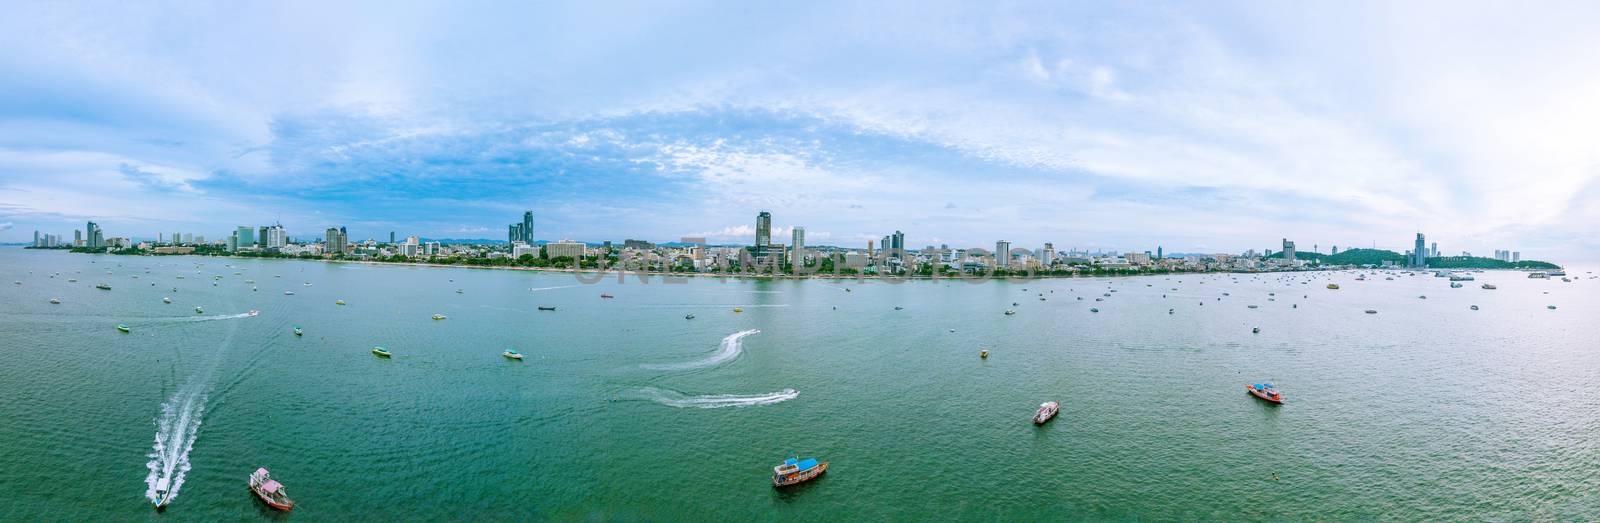 Pattaya cityscape panorama view from the sea